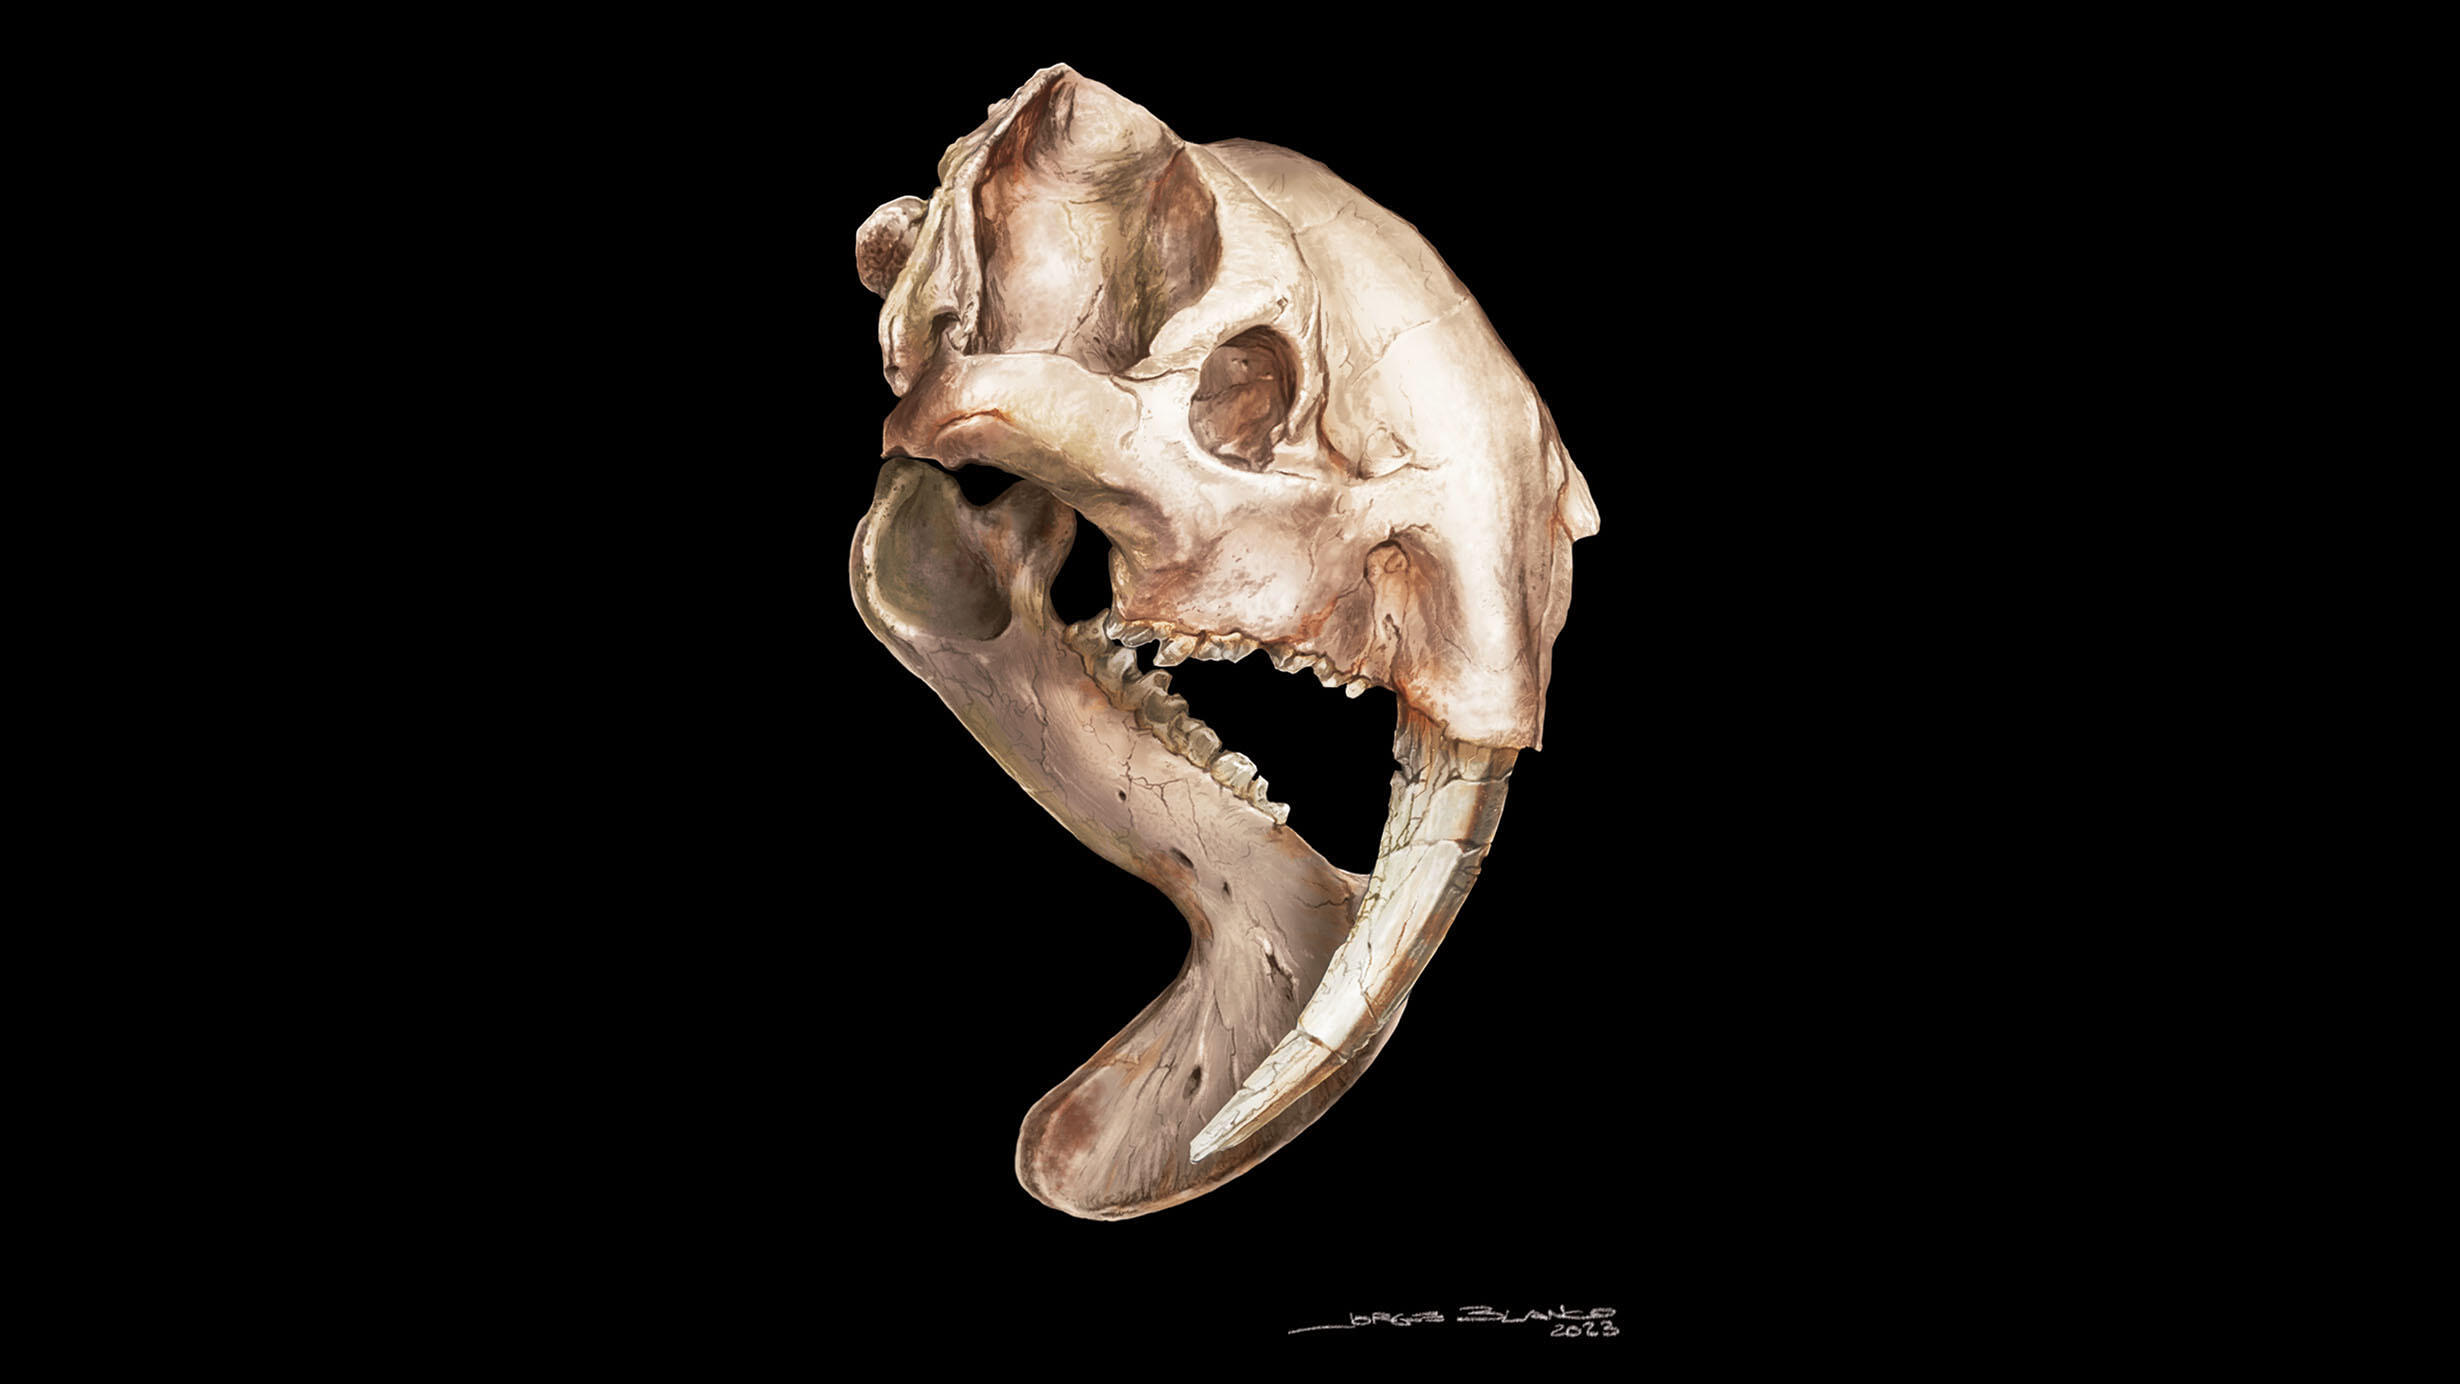 Visualization of a thylacosmilus atrox (a marsupial sabertooth) skull in profile, with a long, curved tooth and jawbone against dark background, with Jorge Blanco's signature at bottom right corner.